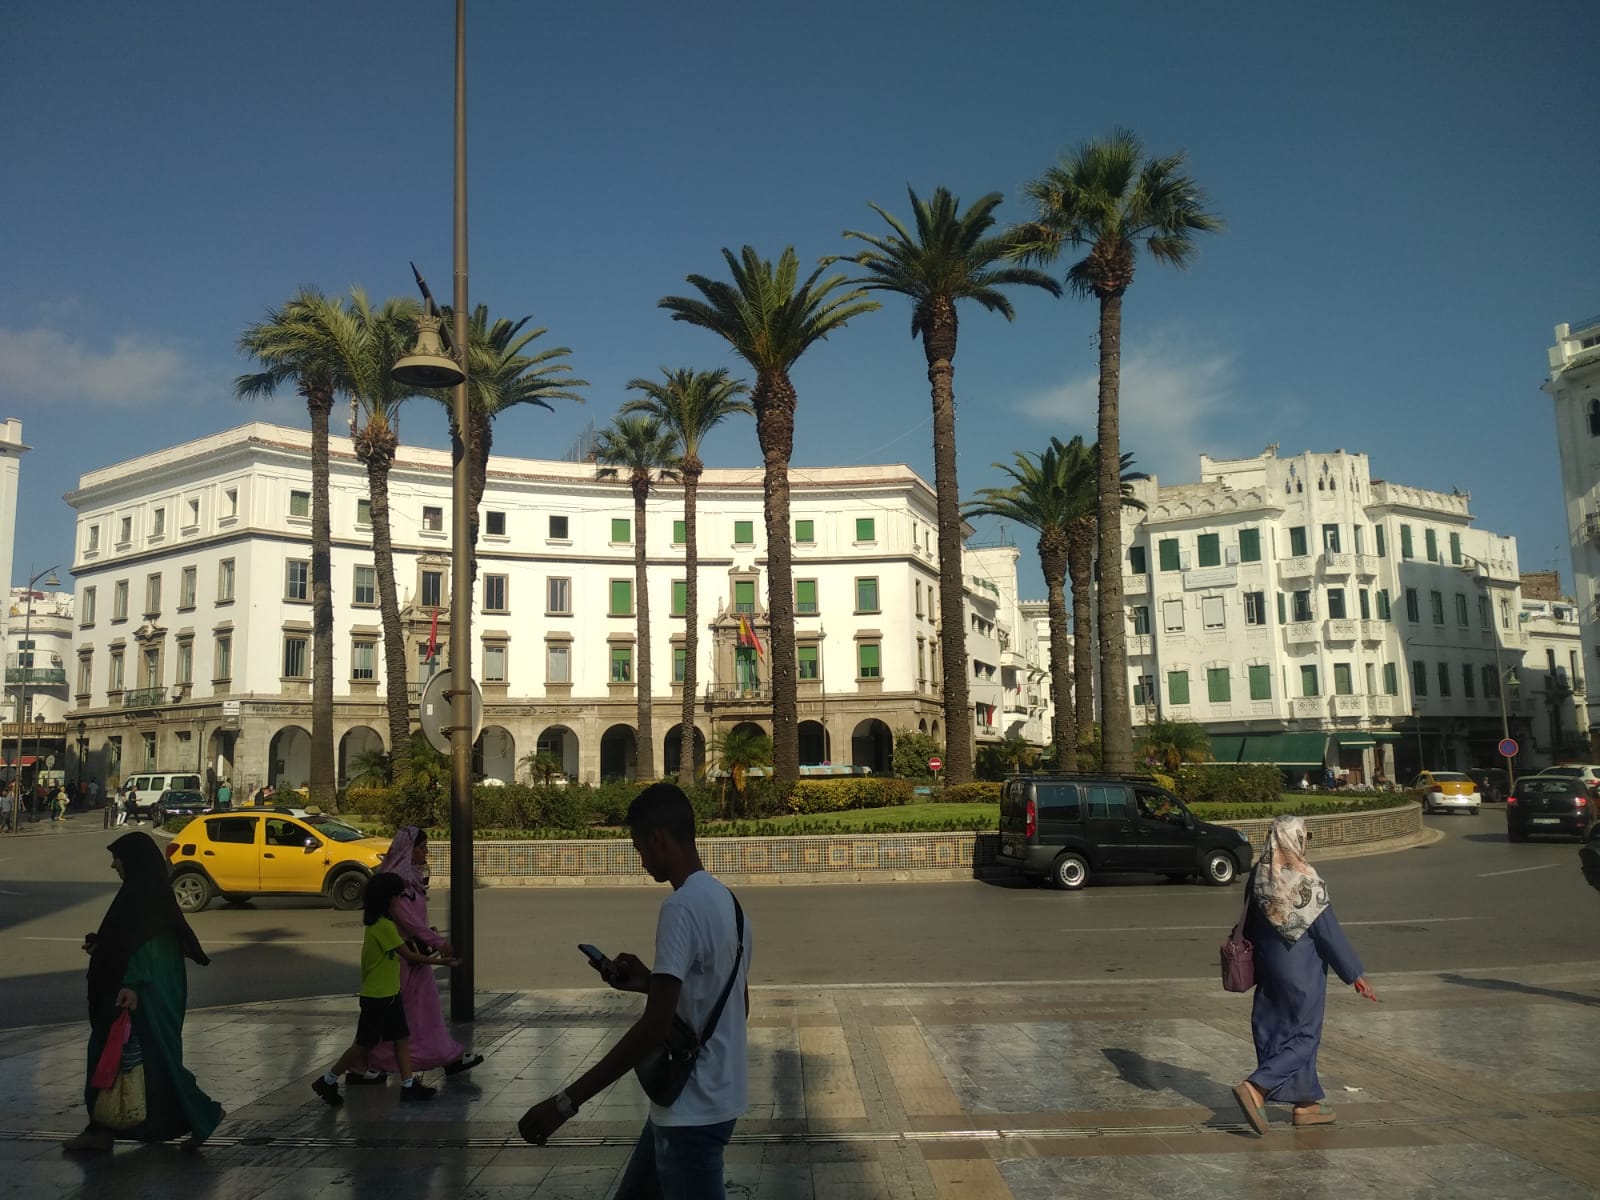 Tangiers Morocco images/2022/mo/1.jpg